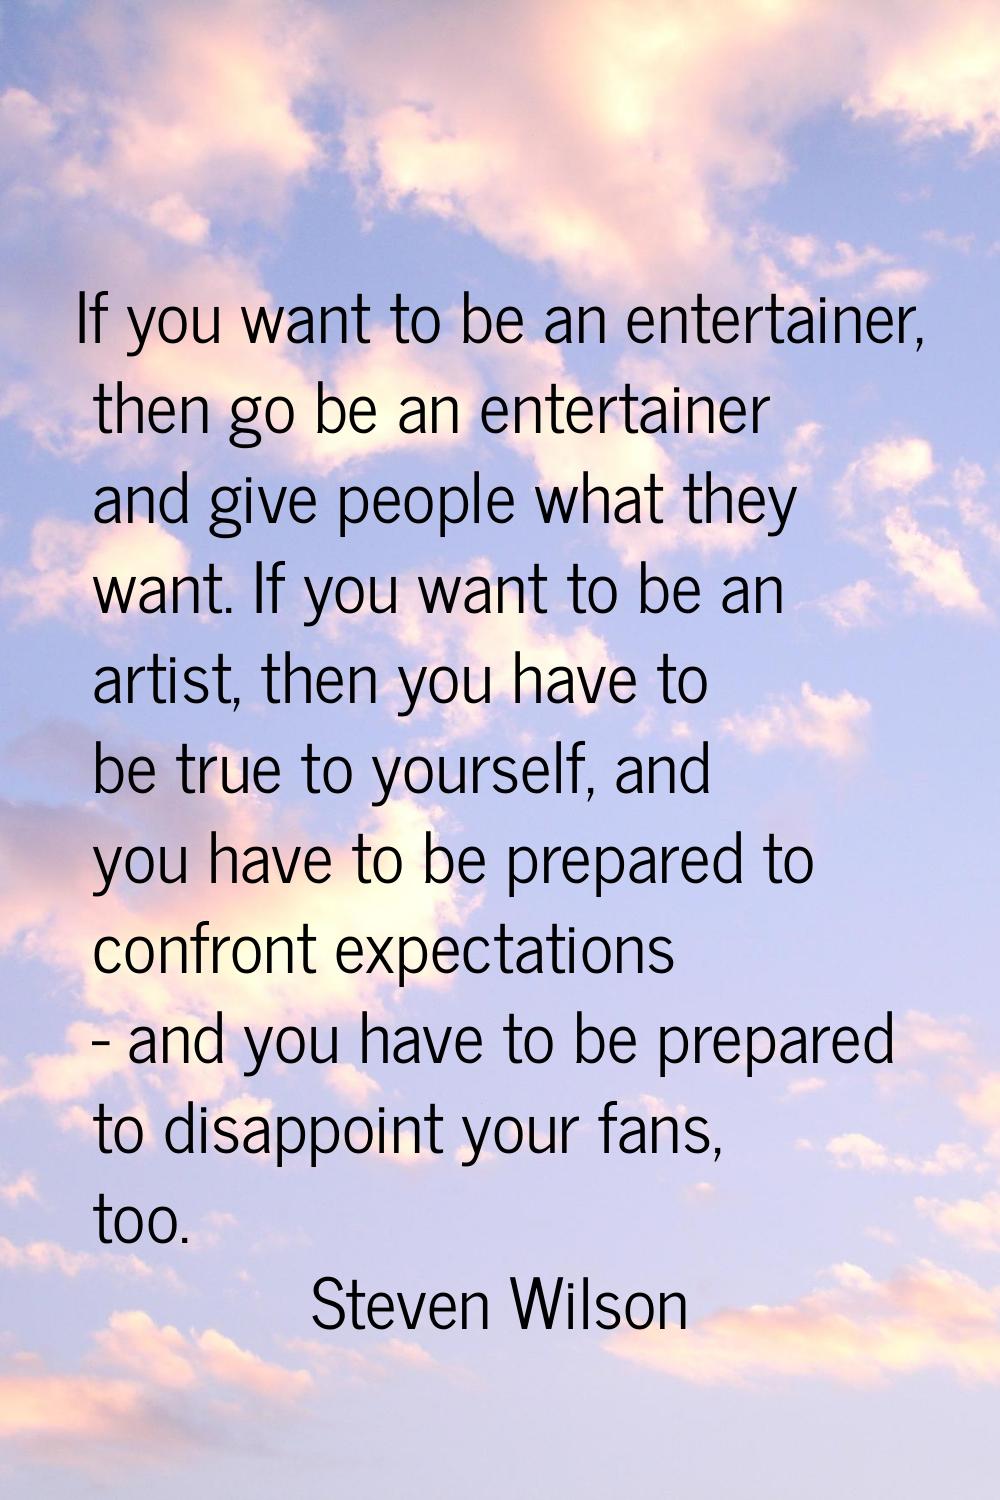 If you want to be an entertainer, then go be an entertainer and give people what they want. If you 